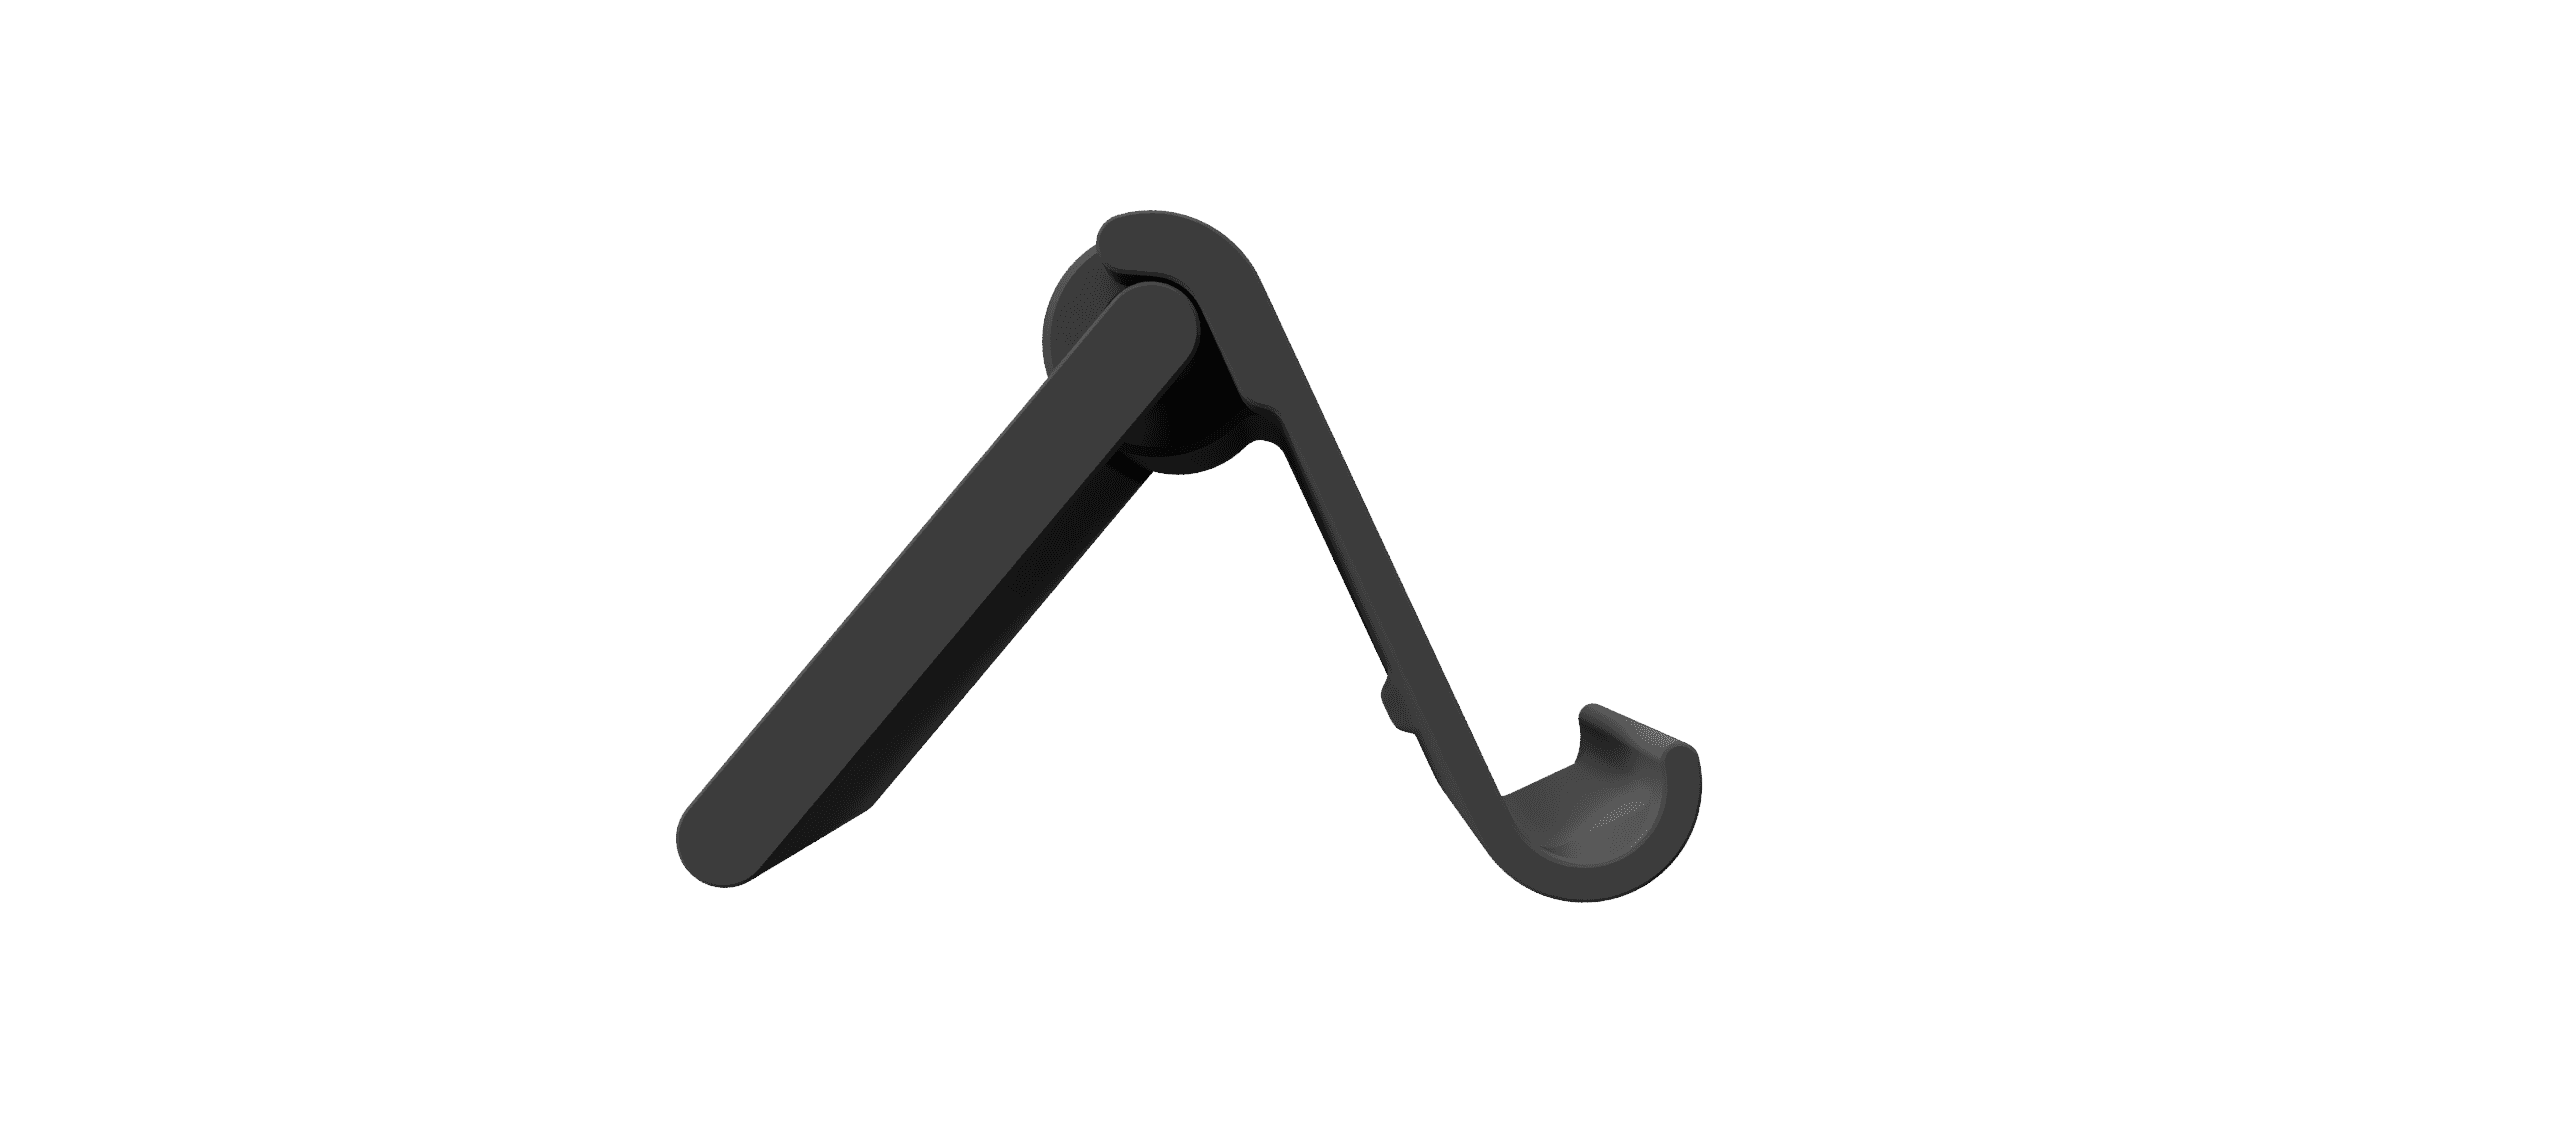 Phone Stand Print-In-Place (v3) 3d model